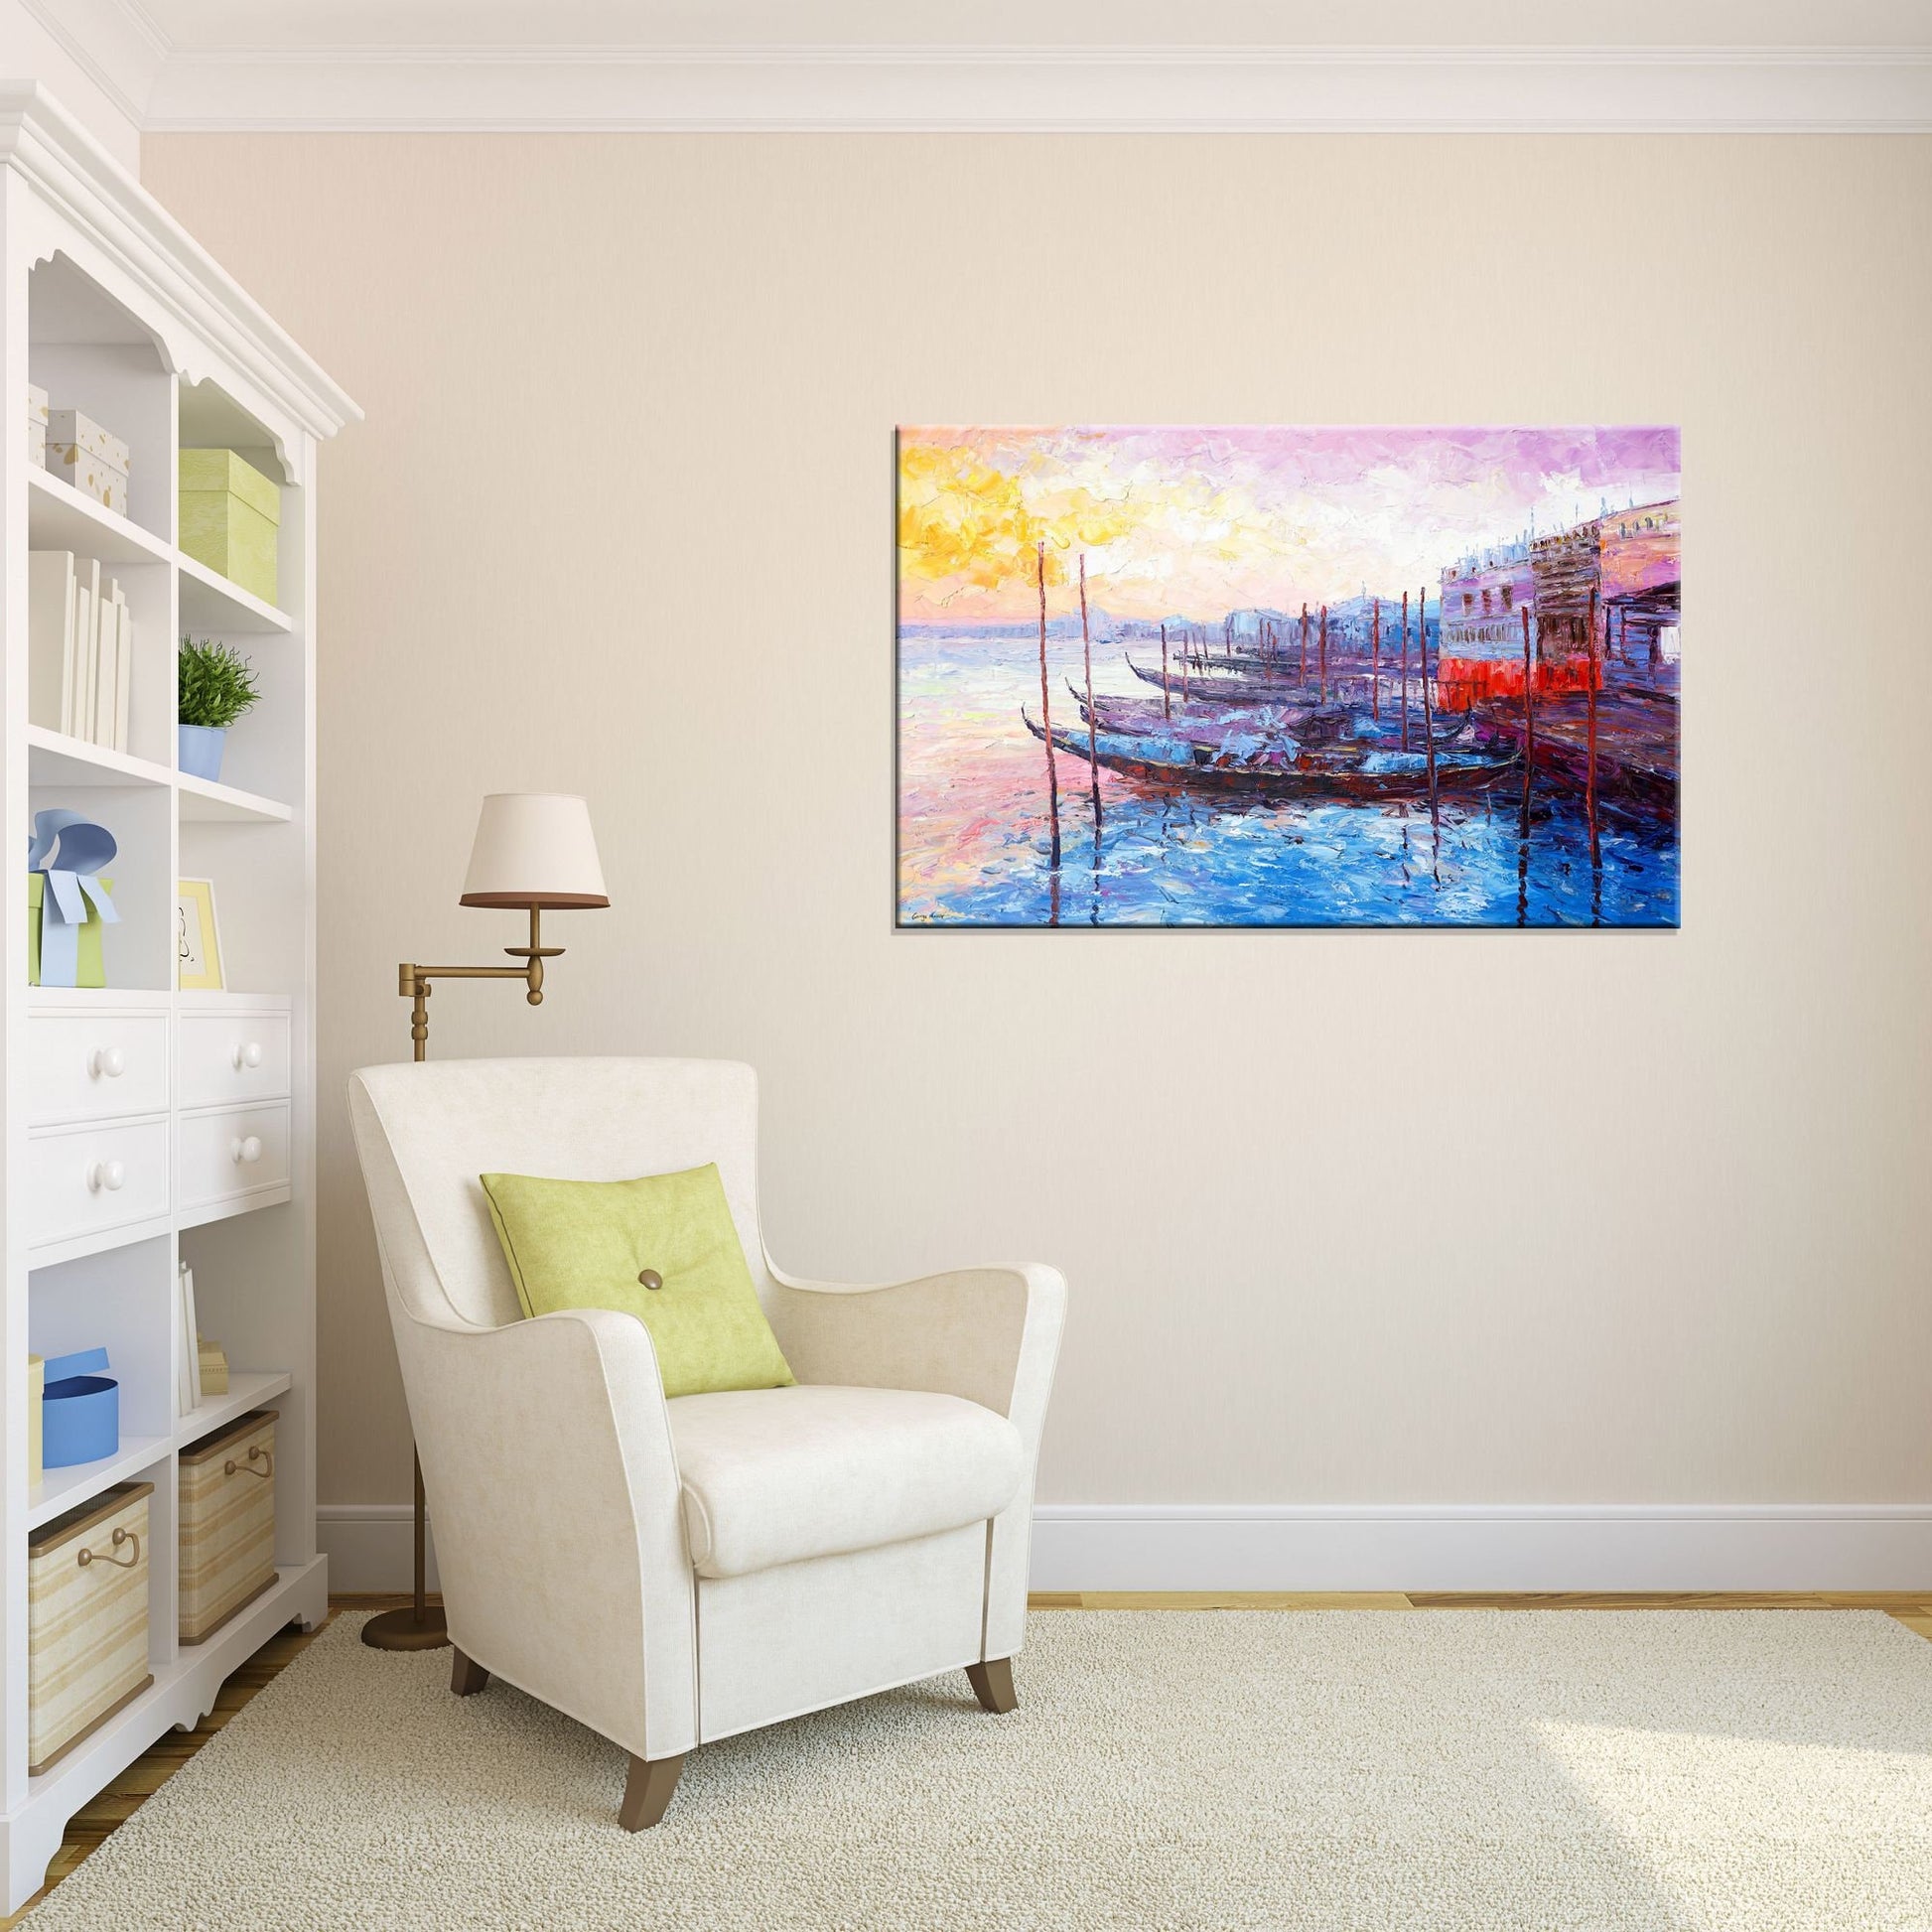 Oil Painting Venice Gondora Grand Canal Sunrise, Fine Art, Wall Art Painting, Extra Large Abstract Painting, Handmade Art, Modern Painting